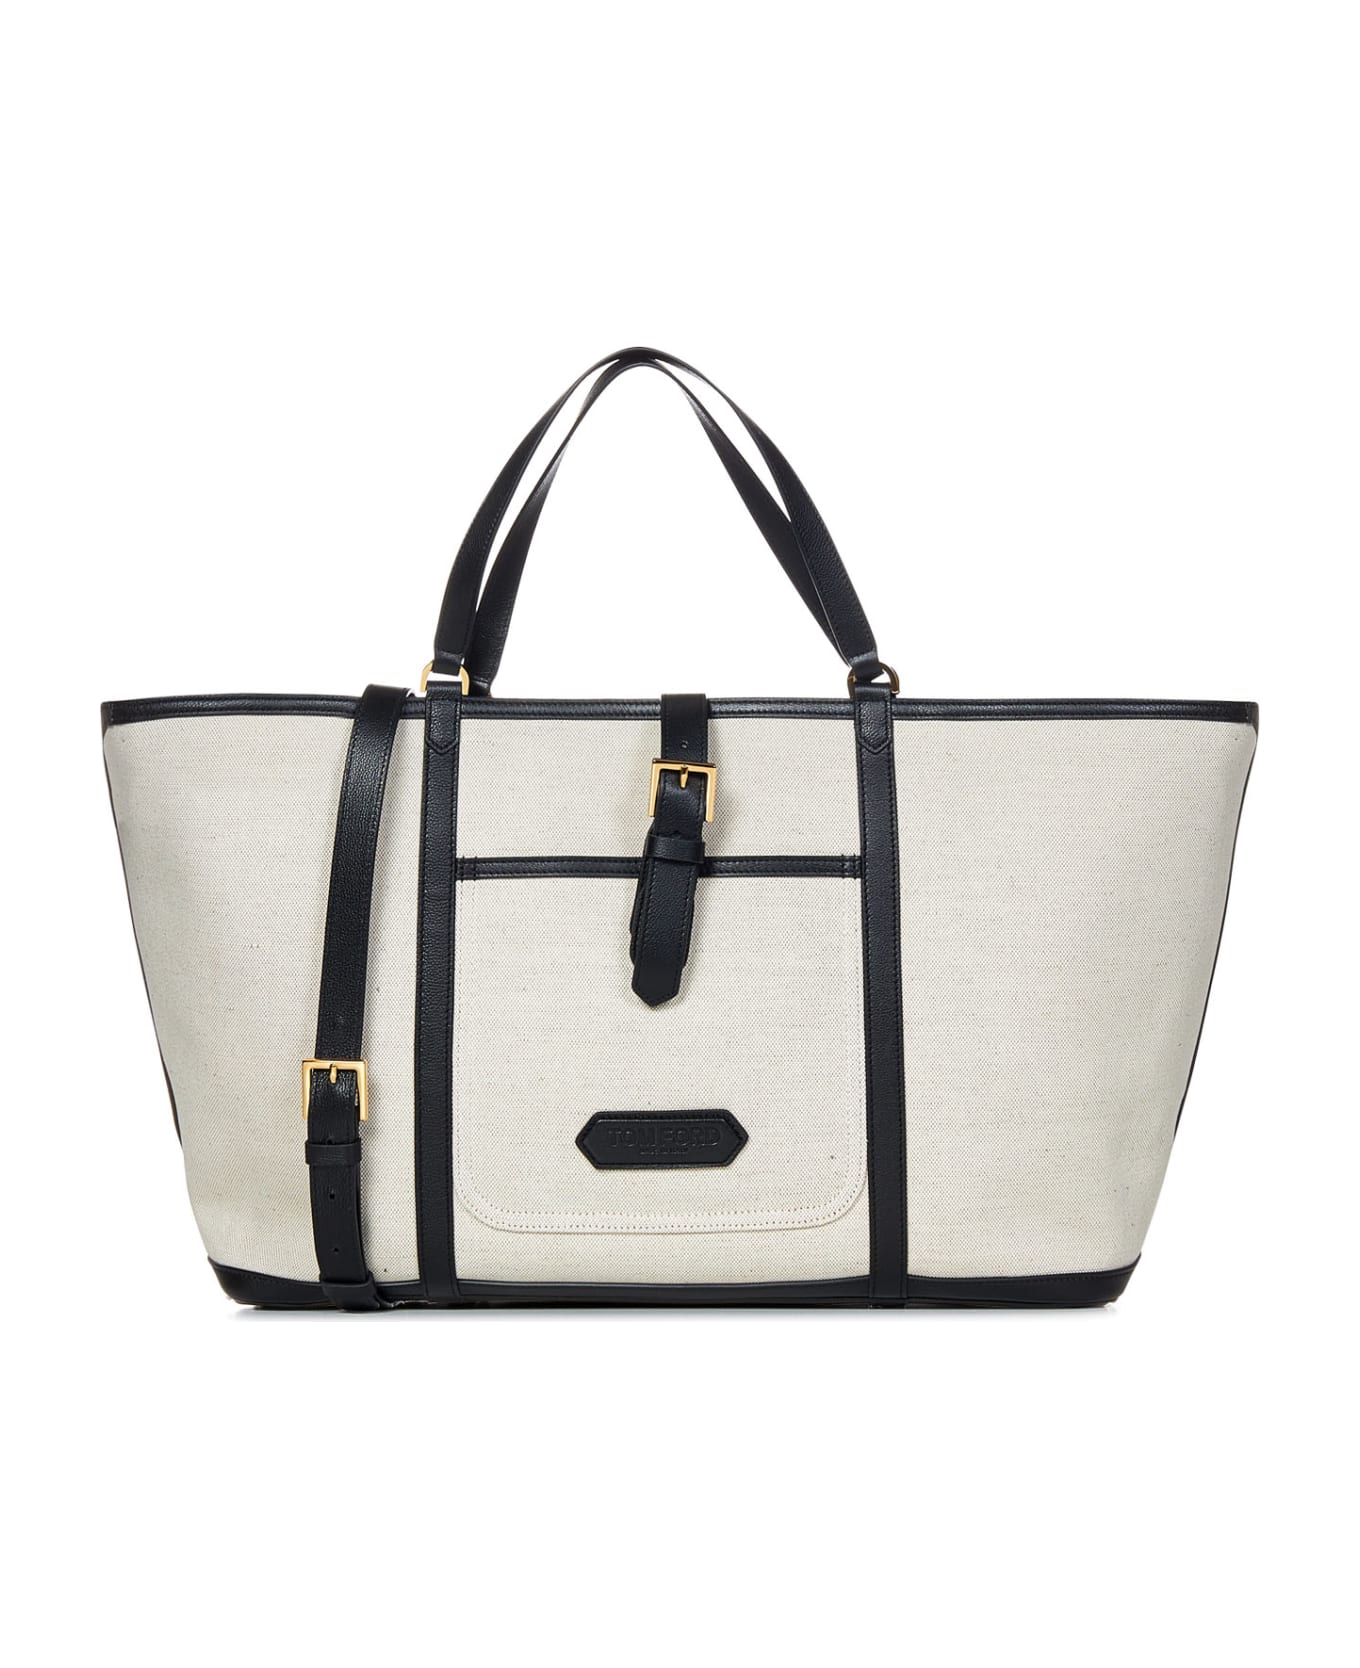 Tom Ford East West Tote - Beige